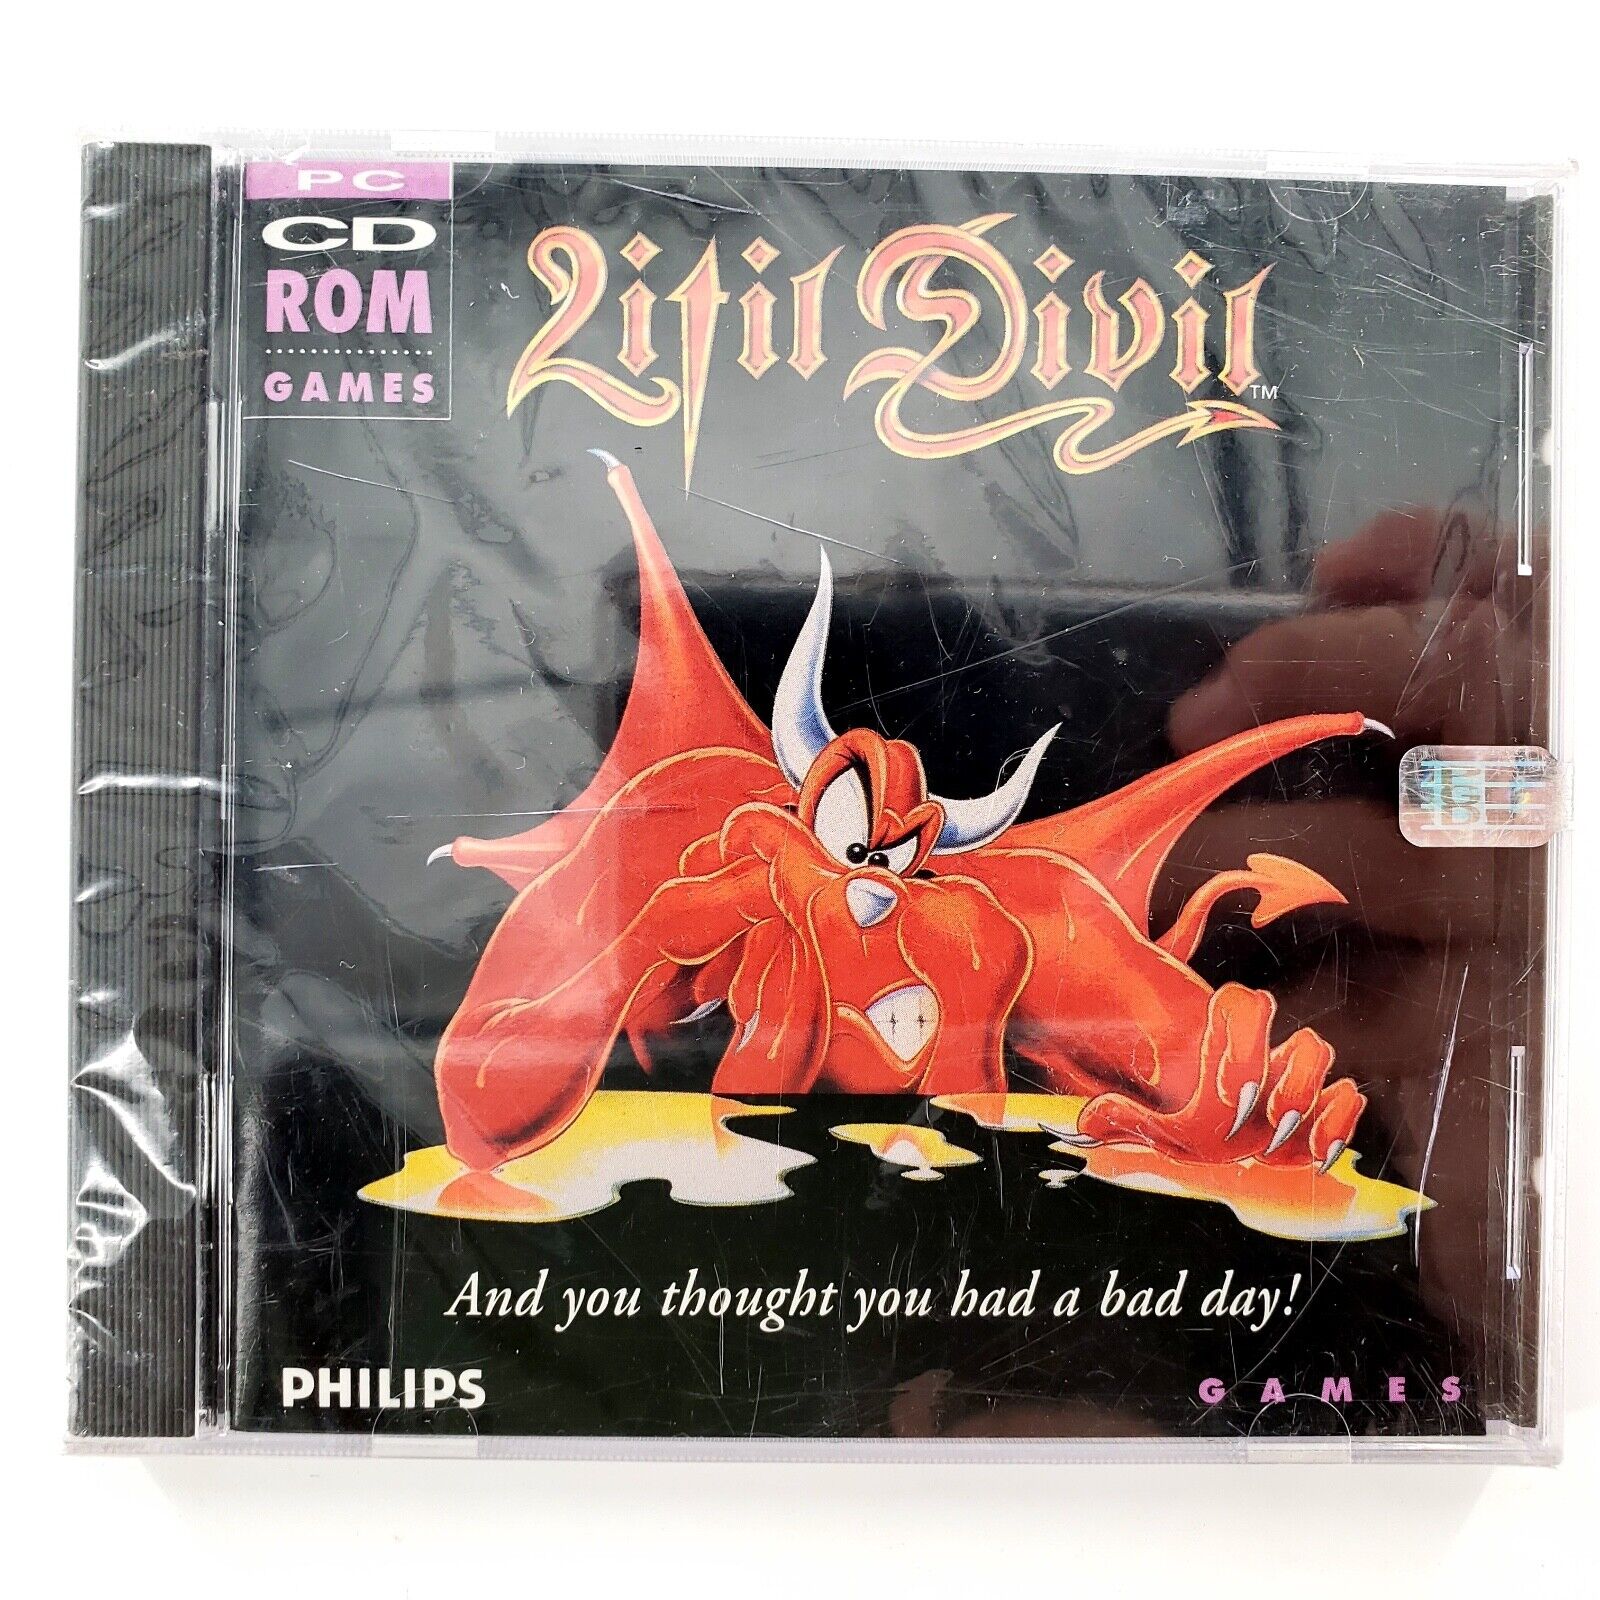 Litil Divil Philips PC CD Rom Small Tear In Foil Brand New Factory Sealed